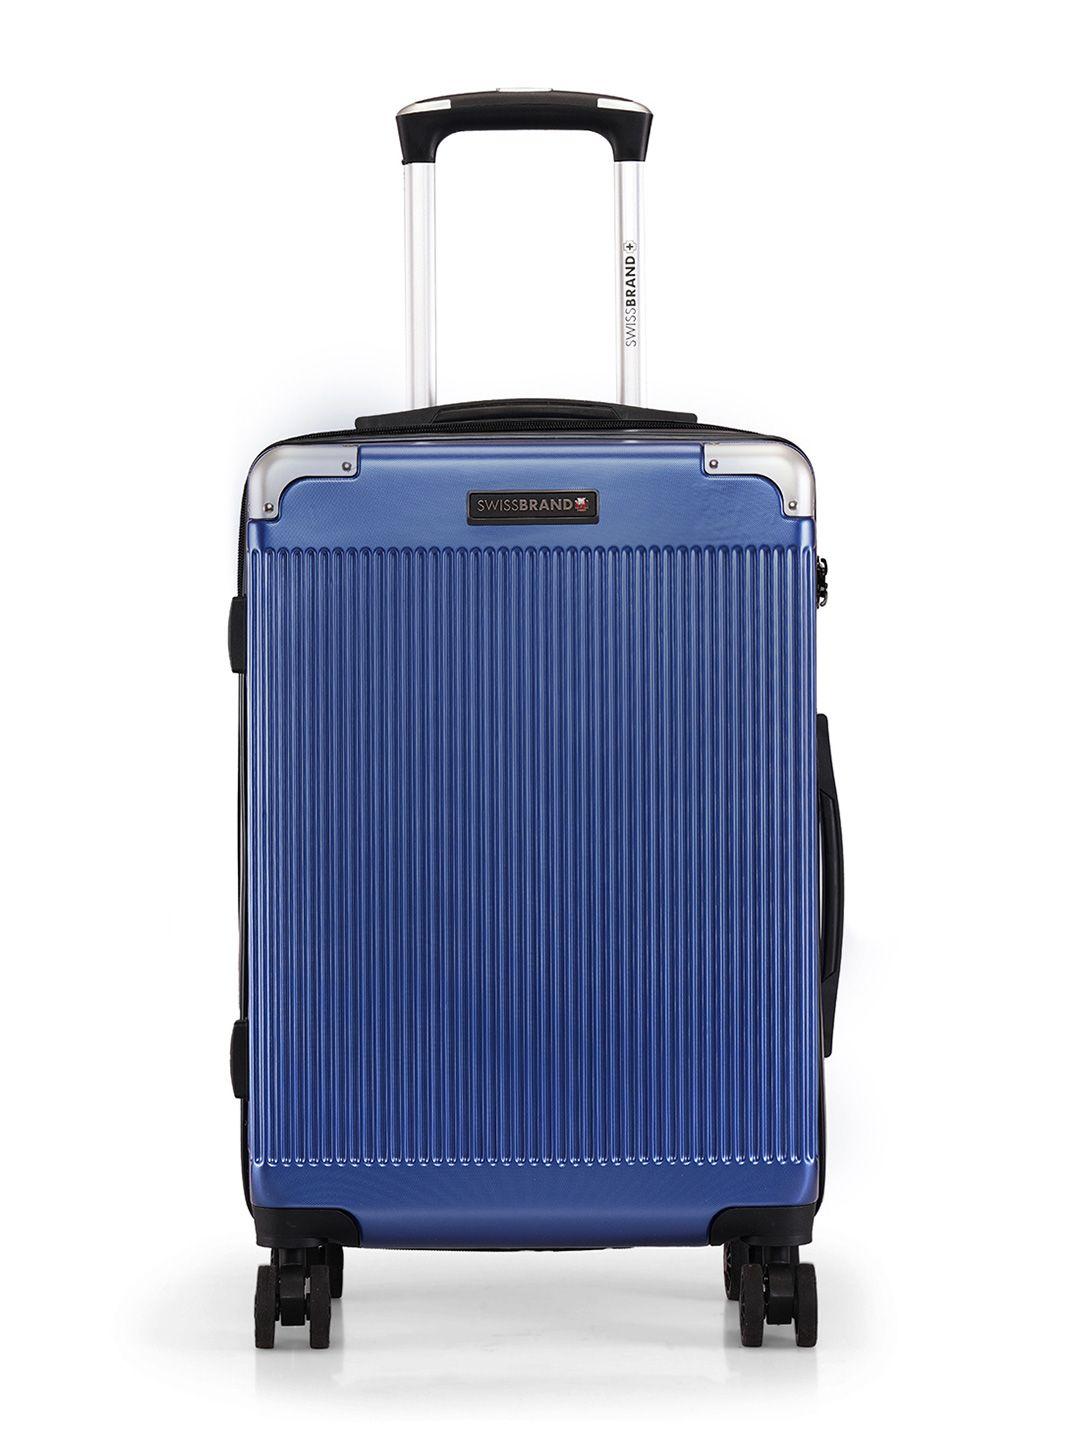 swiss brand unisex blue textured geneve 360-degree rotation hard-sided cabin trolley suitcase